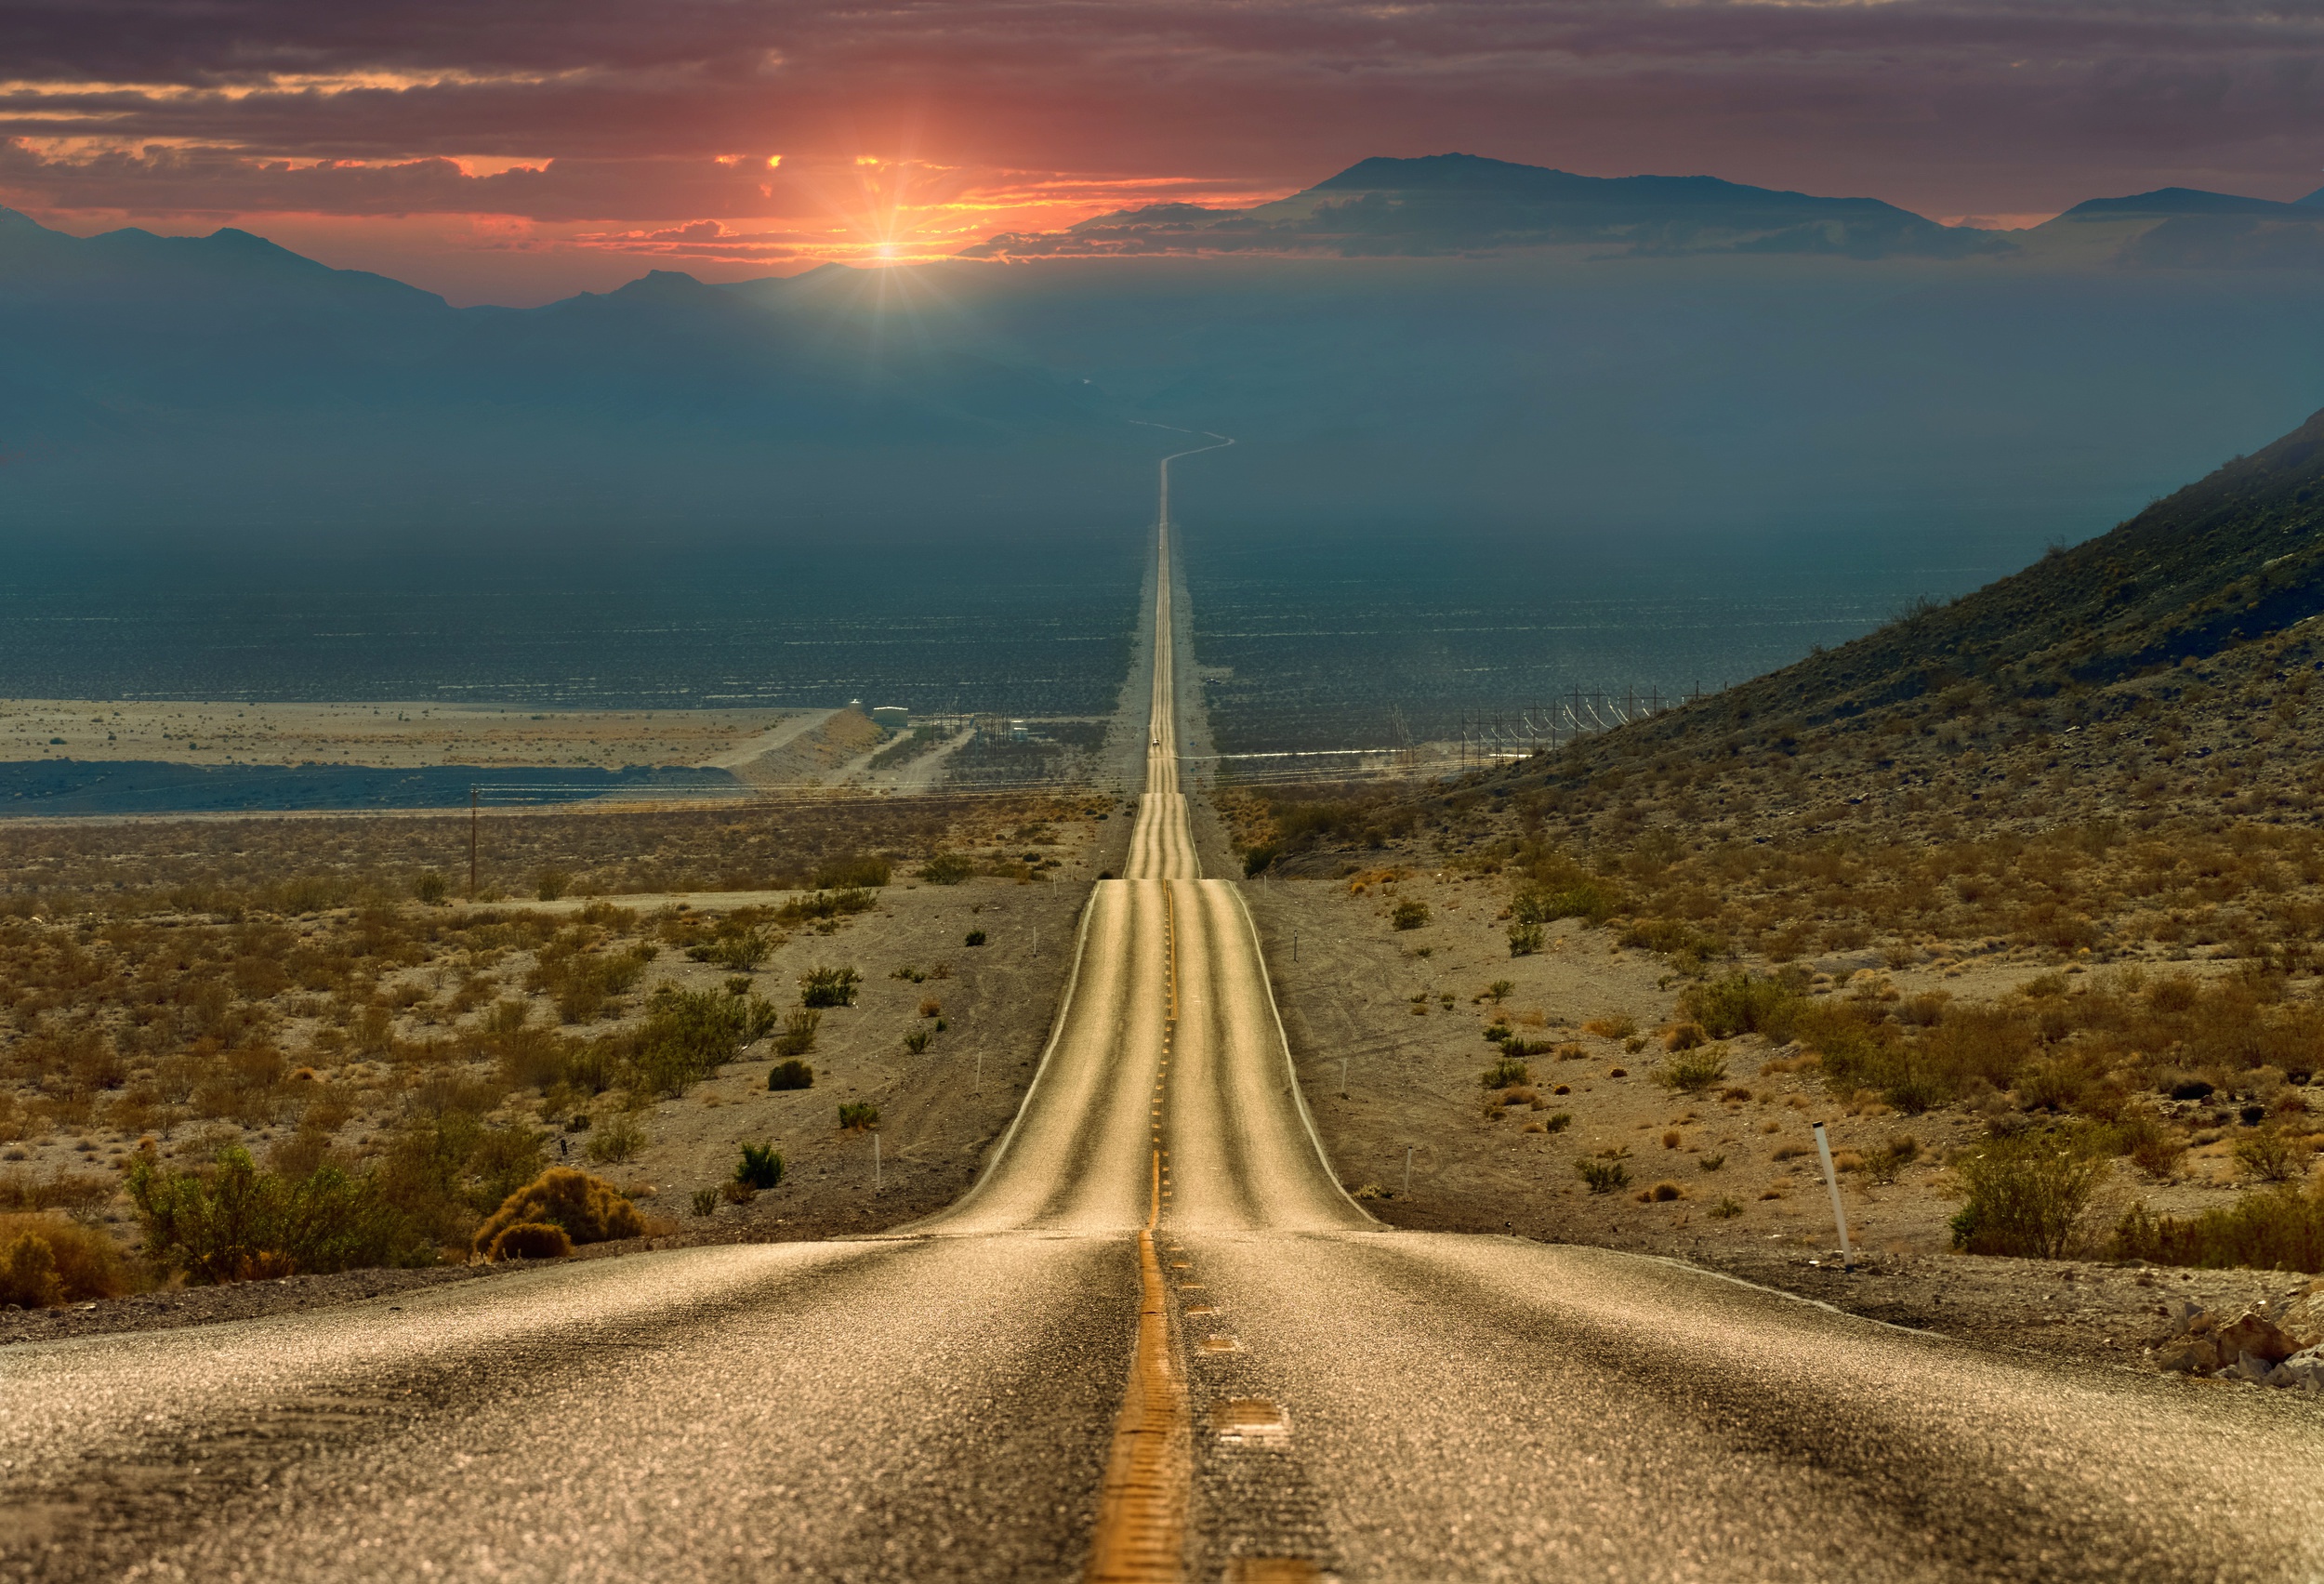 Road Hd Wallpaper Background Image 2500x1704